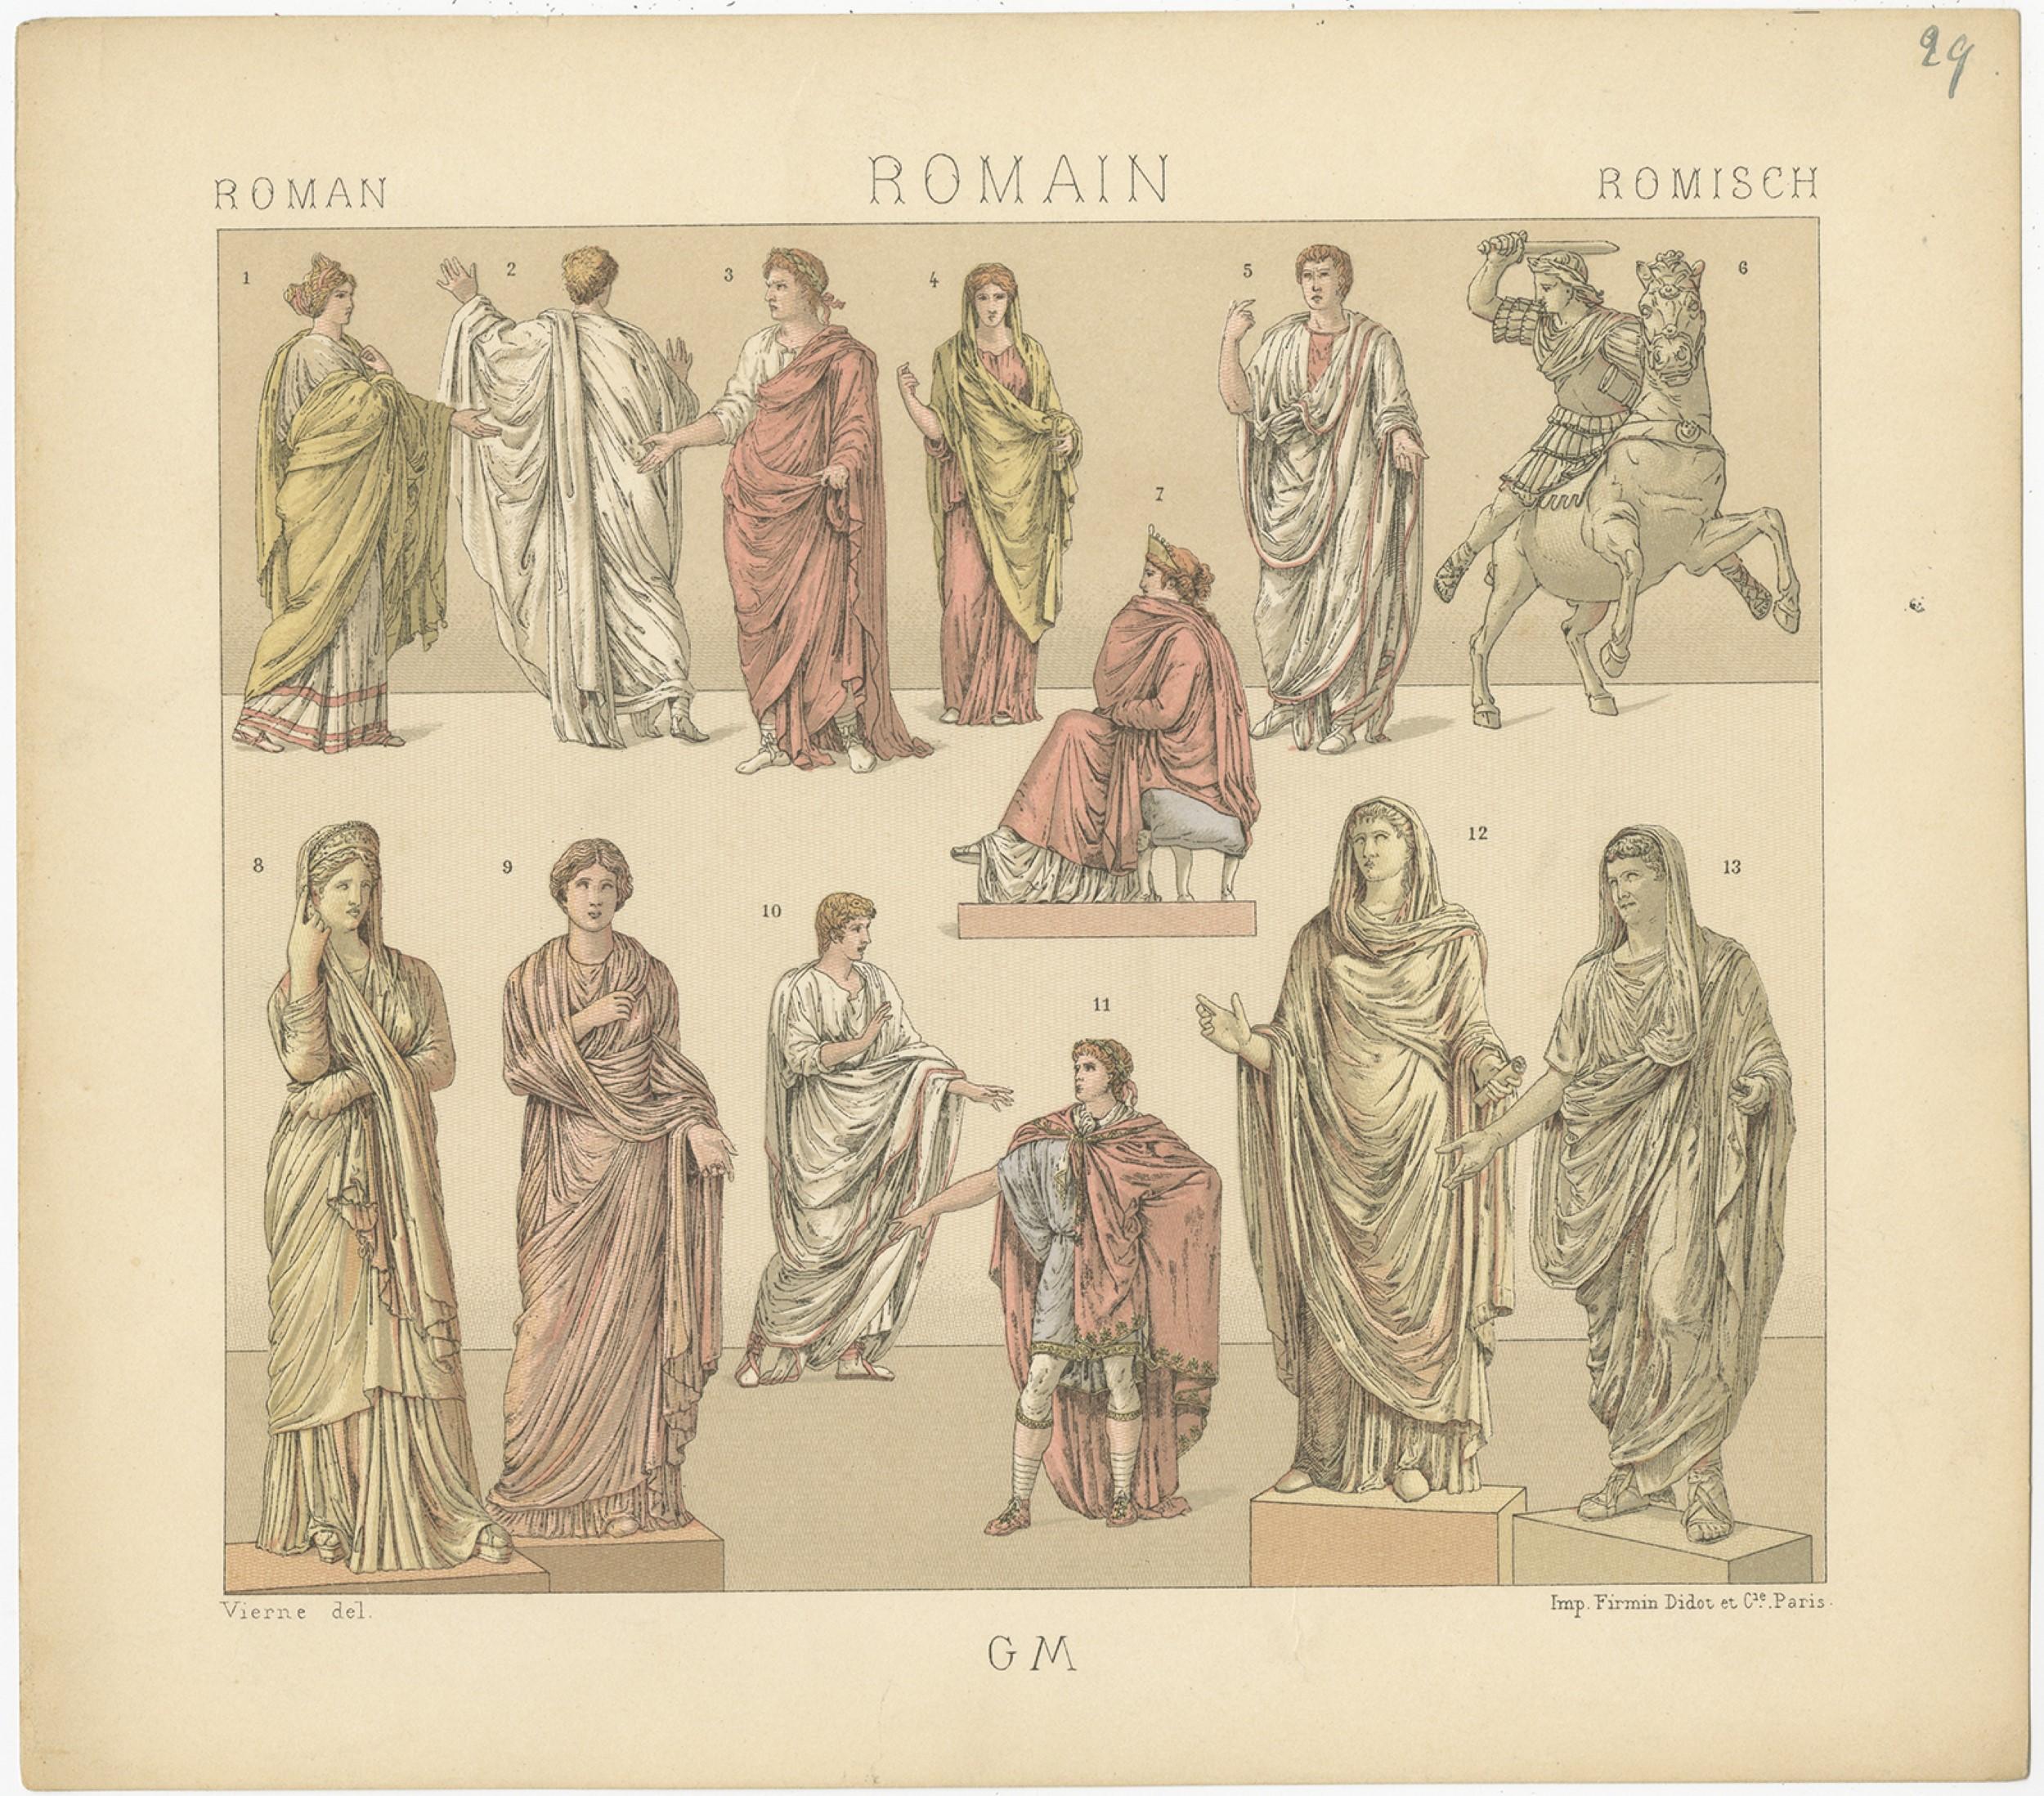 Antique print titled 'Roman - Romain - Romisch'. Chromolithograph of Roman Clothing. This print originates from 'Le Costume Historique' by M.A. Racinet. Published, circa 1880.